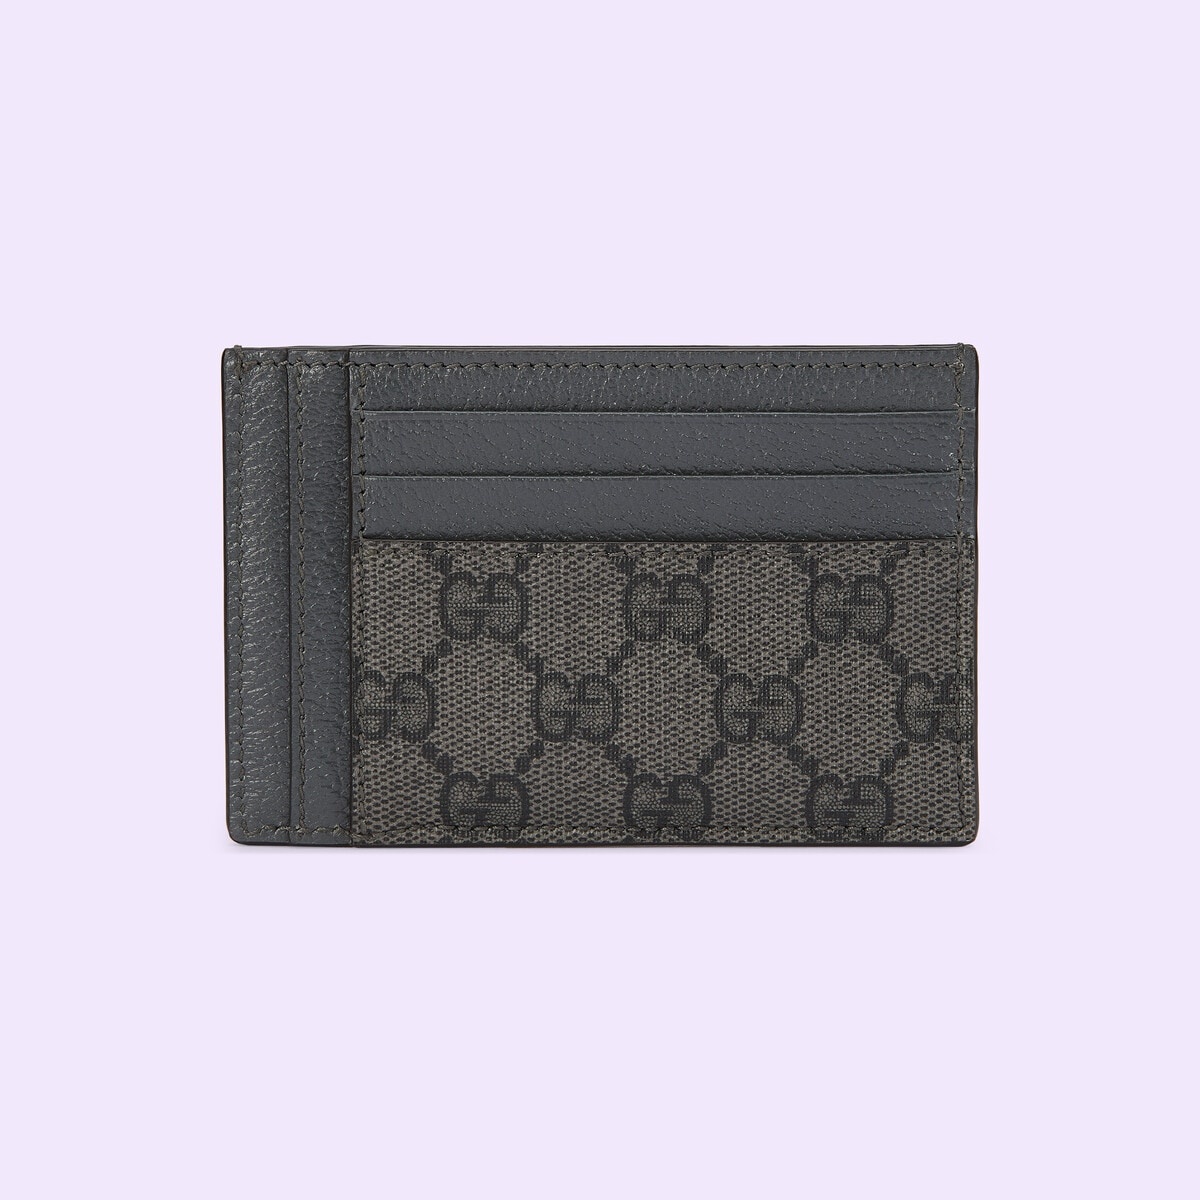 Ophidia card case - 4